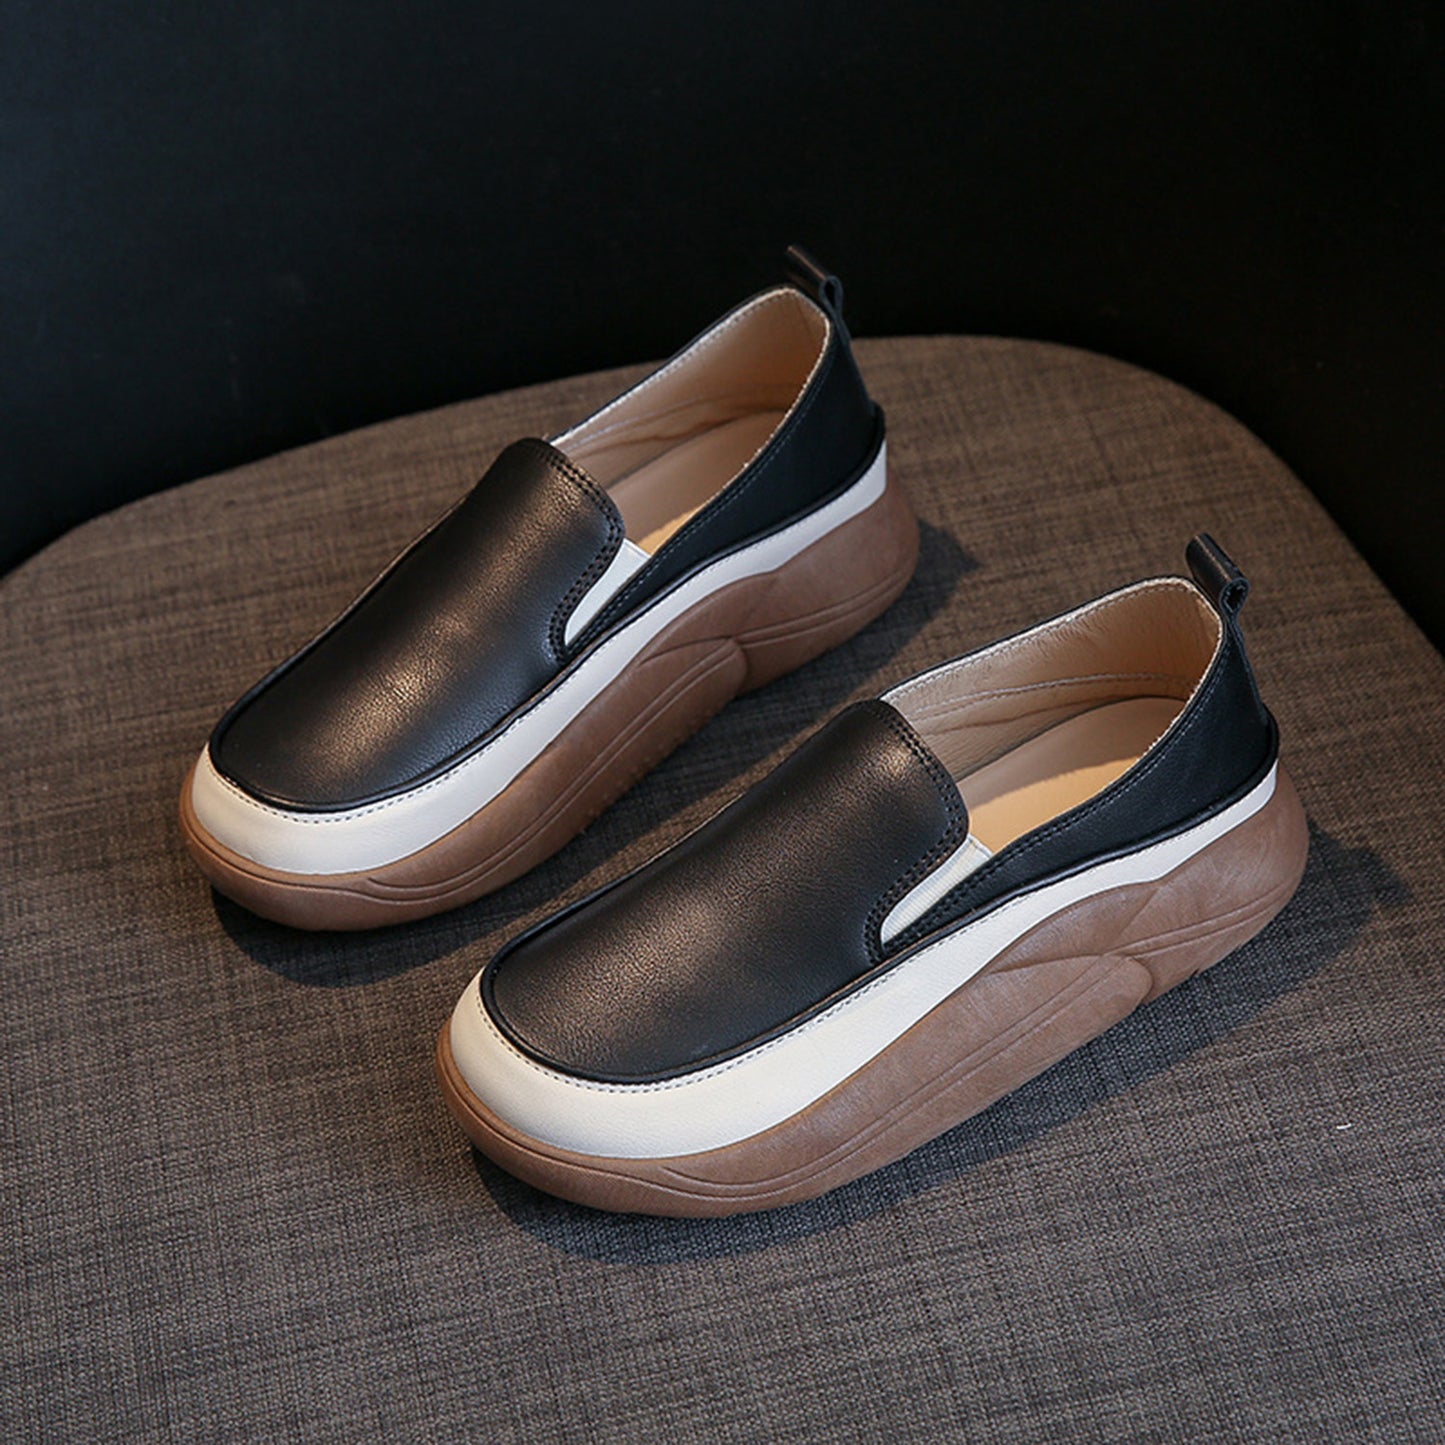 Chunky Slip On Shoes (4 Colors)